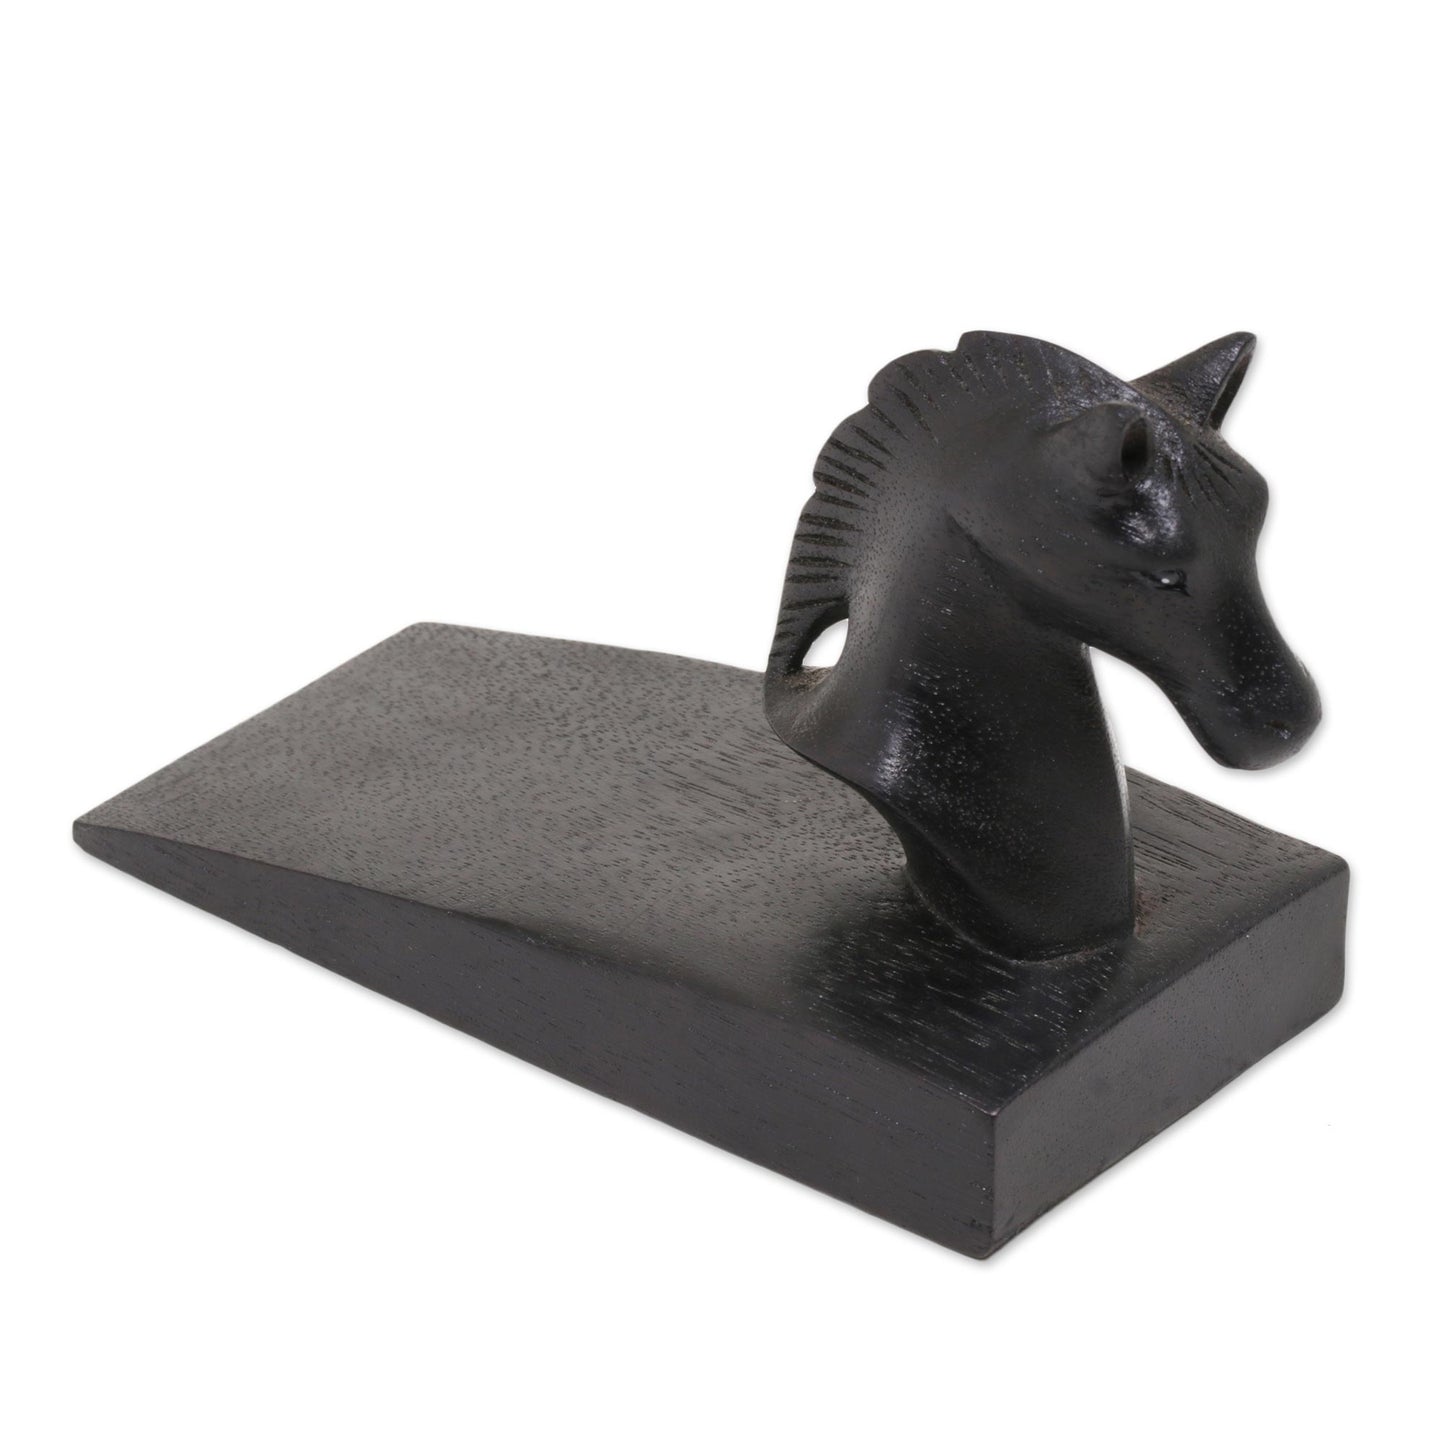 Handy Horse in Black Hand Carved Suar Wood Horse Door Stopper in Black from Bali